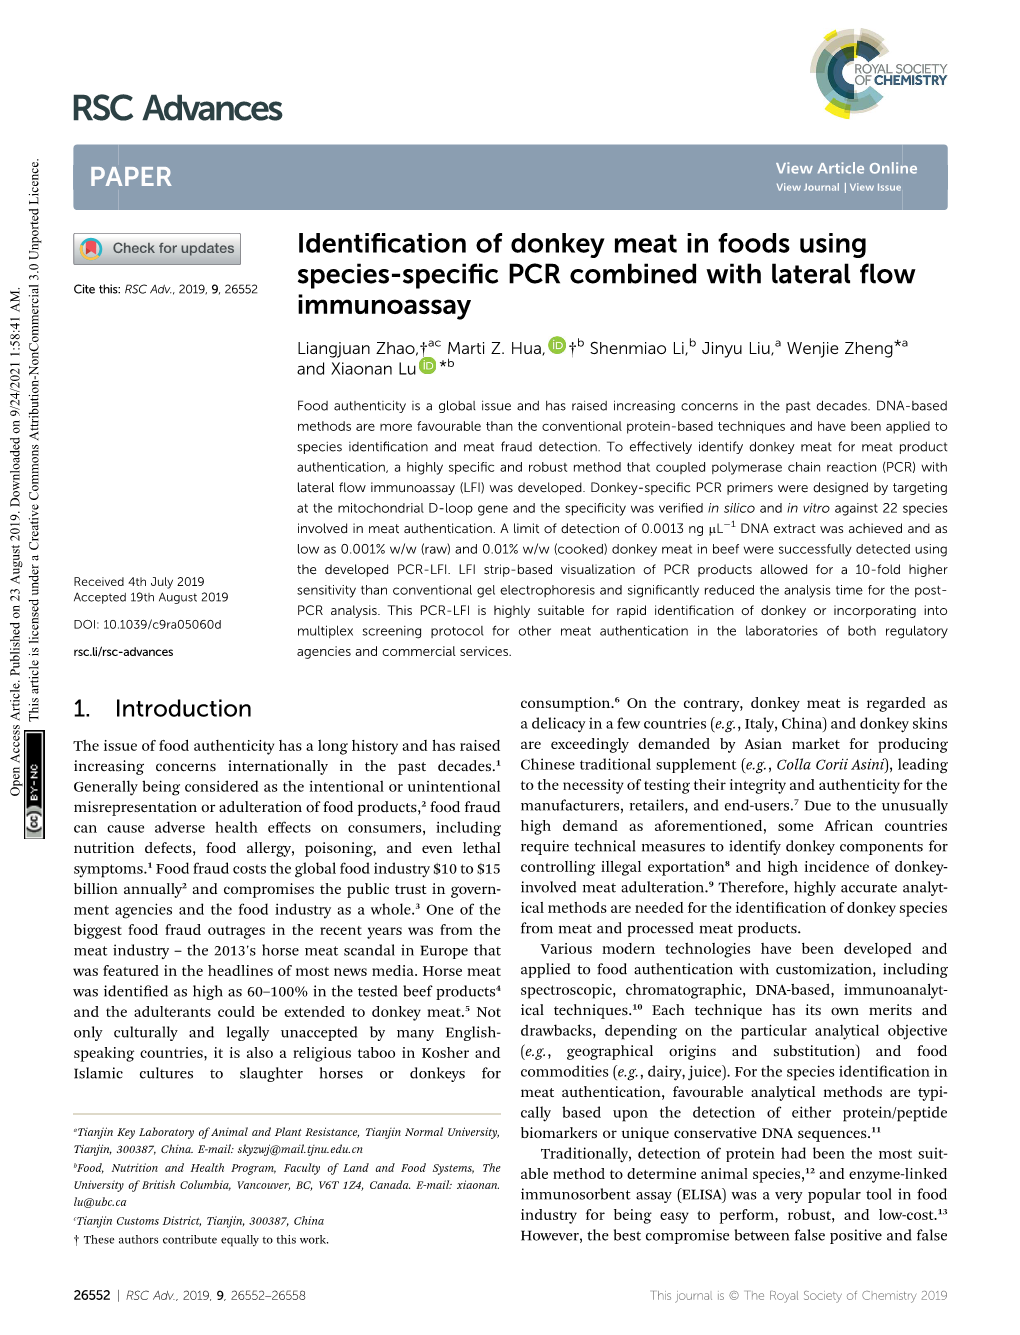 Identification of Donkey Meat in Foods Using Species-Specific PCR